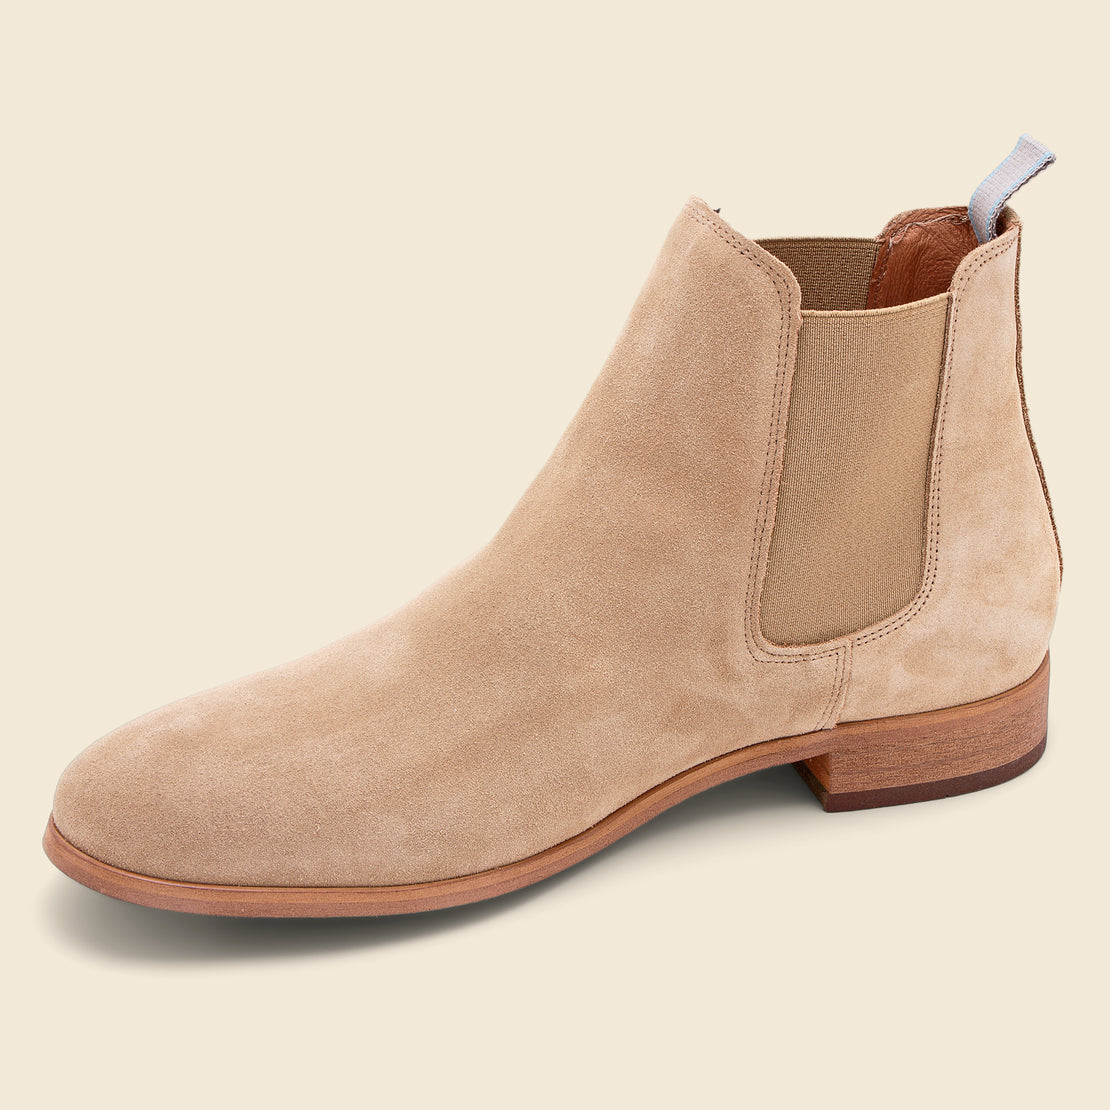 Dev Suede Chelsea Boot - Sand - Shoe the Bear - STAG Provisions - Shoes - Boots / Chukkas